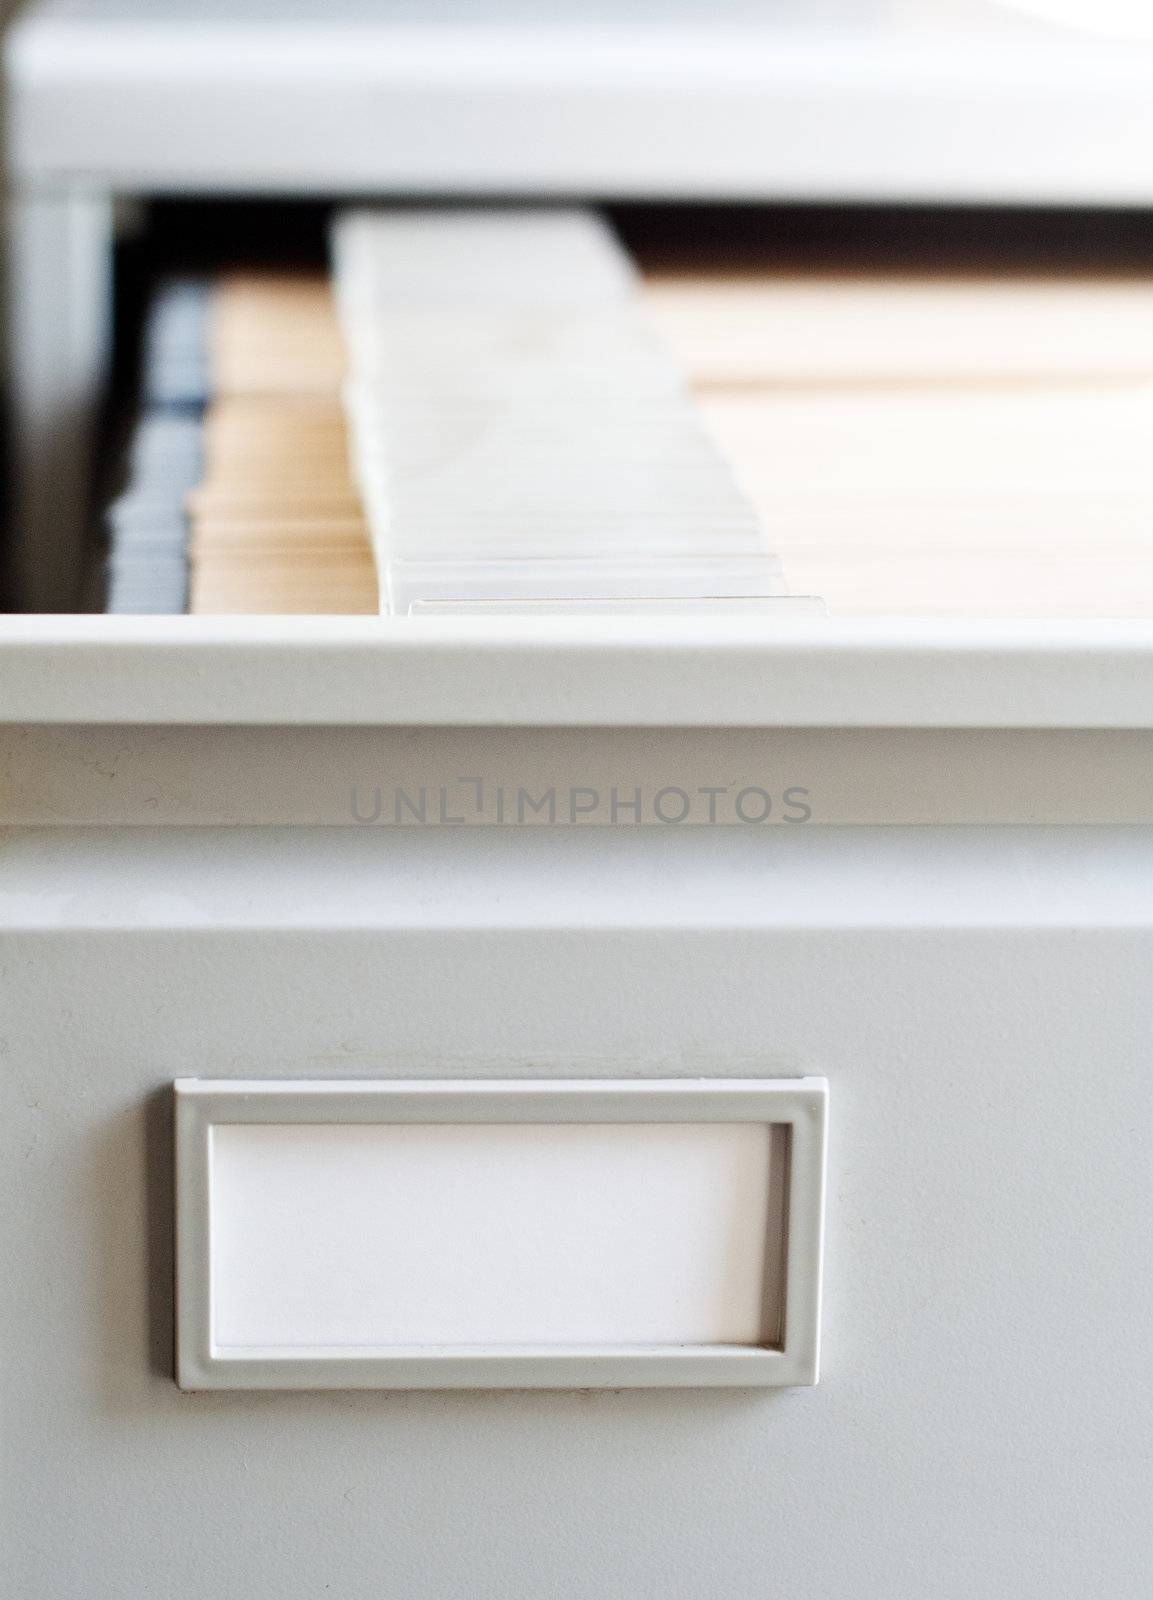 Opened drawer of a file cabinet by kaarsten